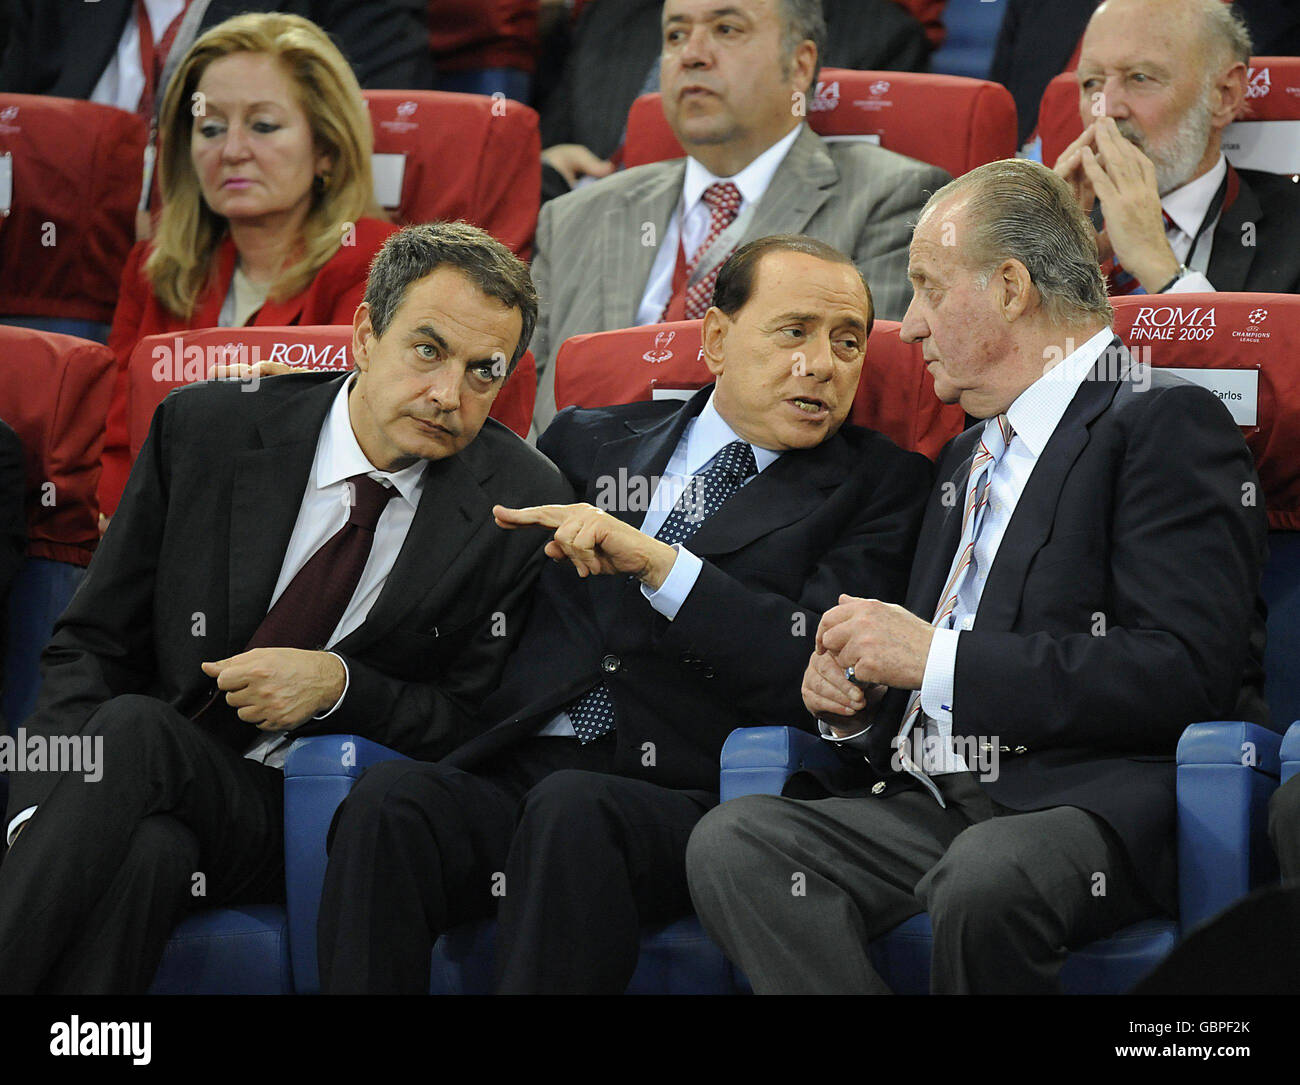 guez Zapatero (left) King Juan Carlos (right) of Spain in the stands before the UEFA Champions League Final at the Olympic Stadium, Rome. Stock Photo